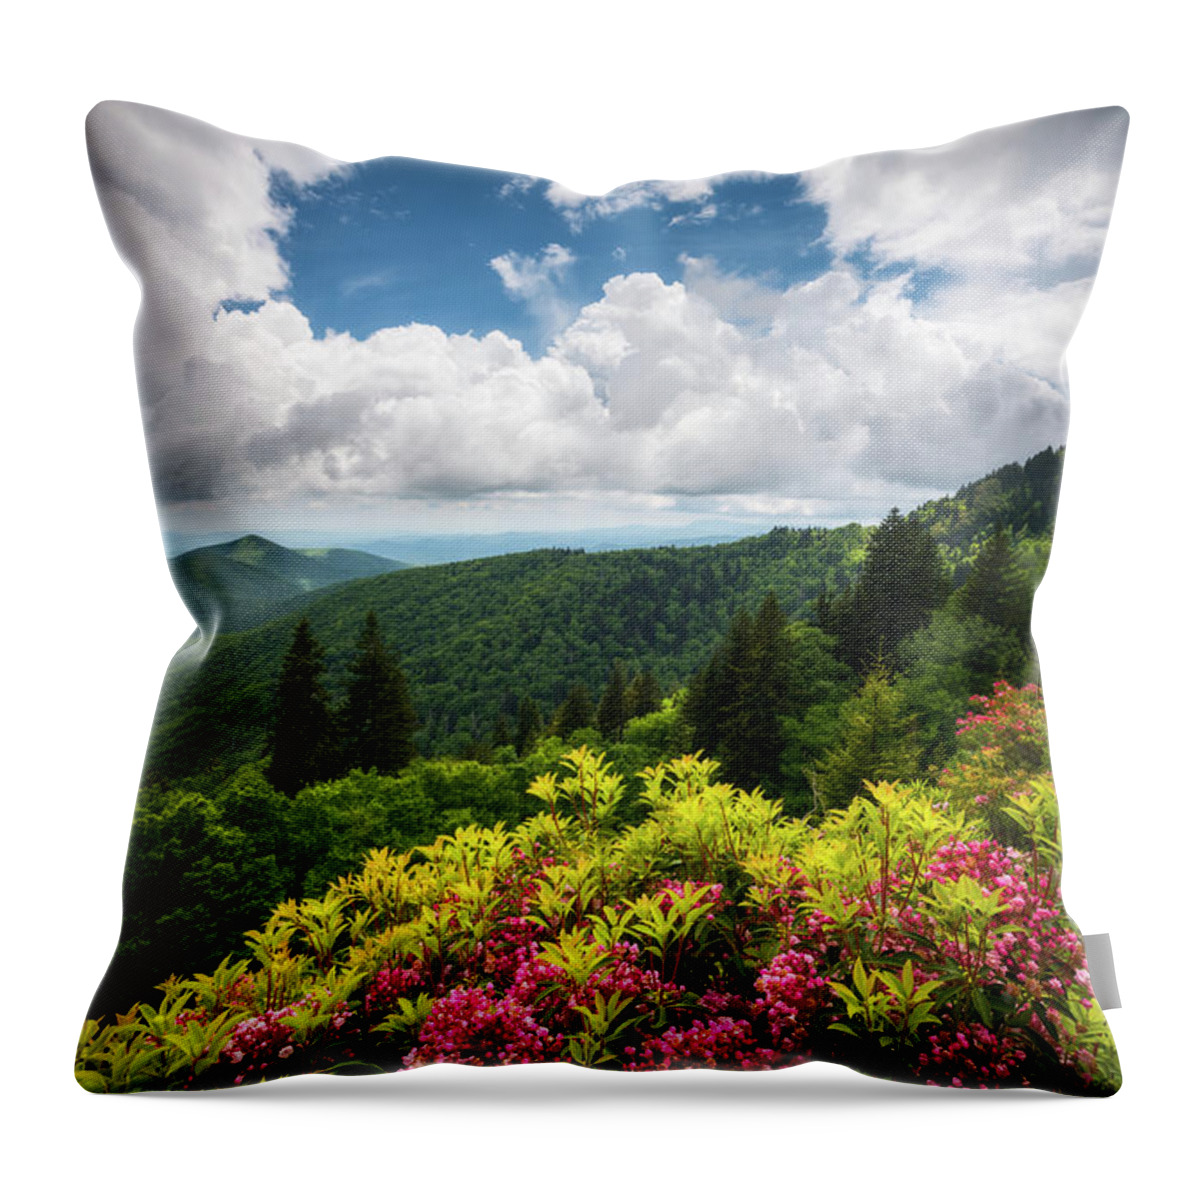 Appalachian Throw Pillow featuring the photograph North Carolina Appalachian Mountains Spring Flowers Scenic Landscape by Dave Allen